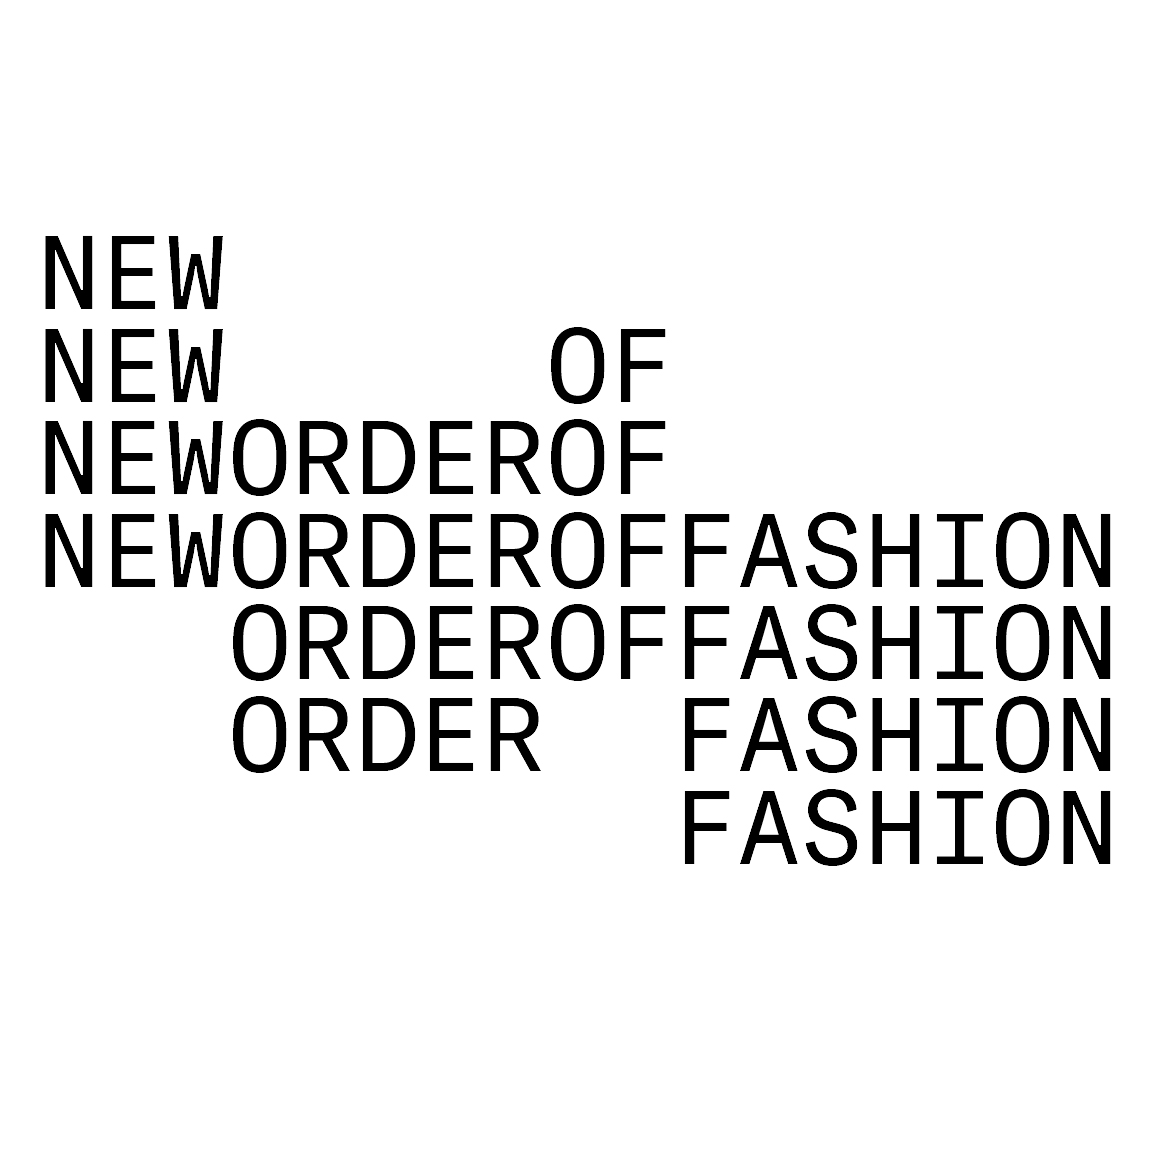 New Order of Fashion 